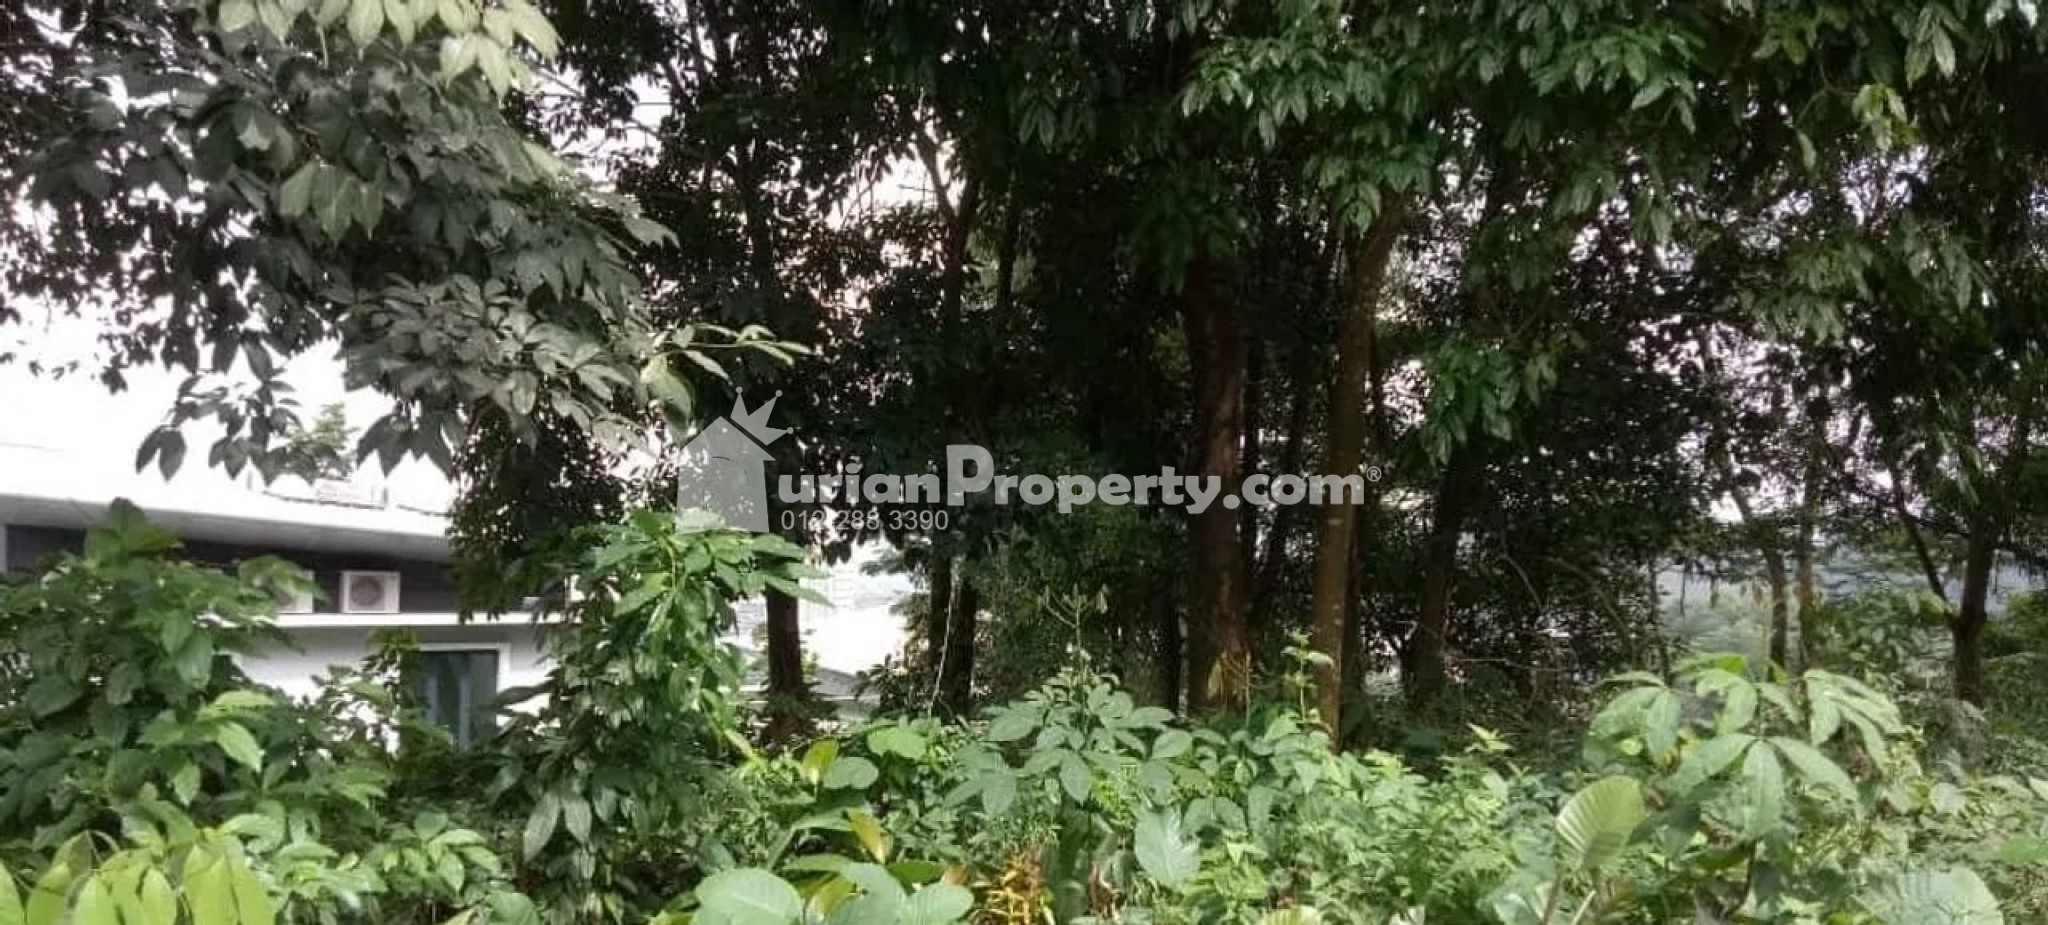 Residential Land For Sale at Country Heights Damansara